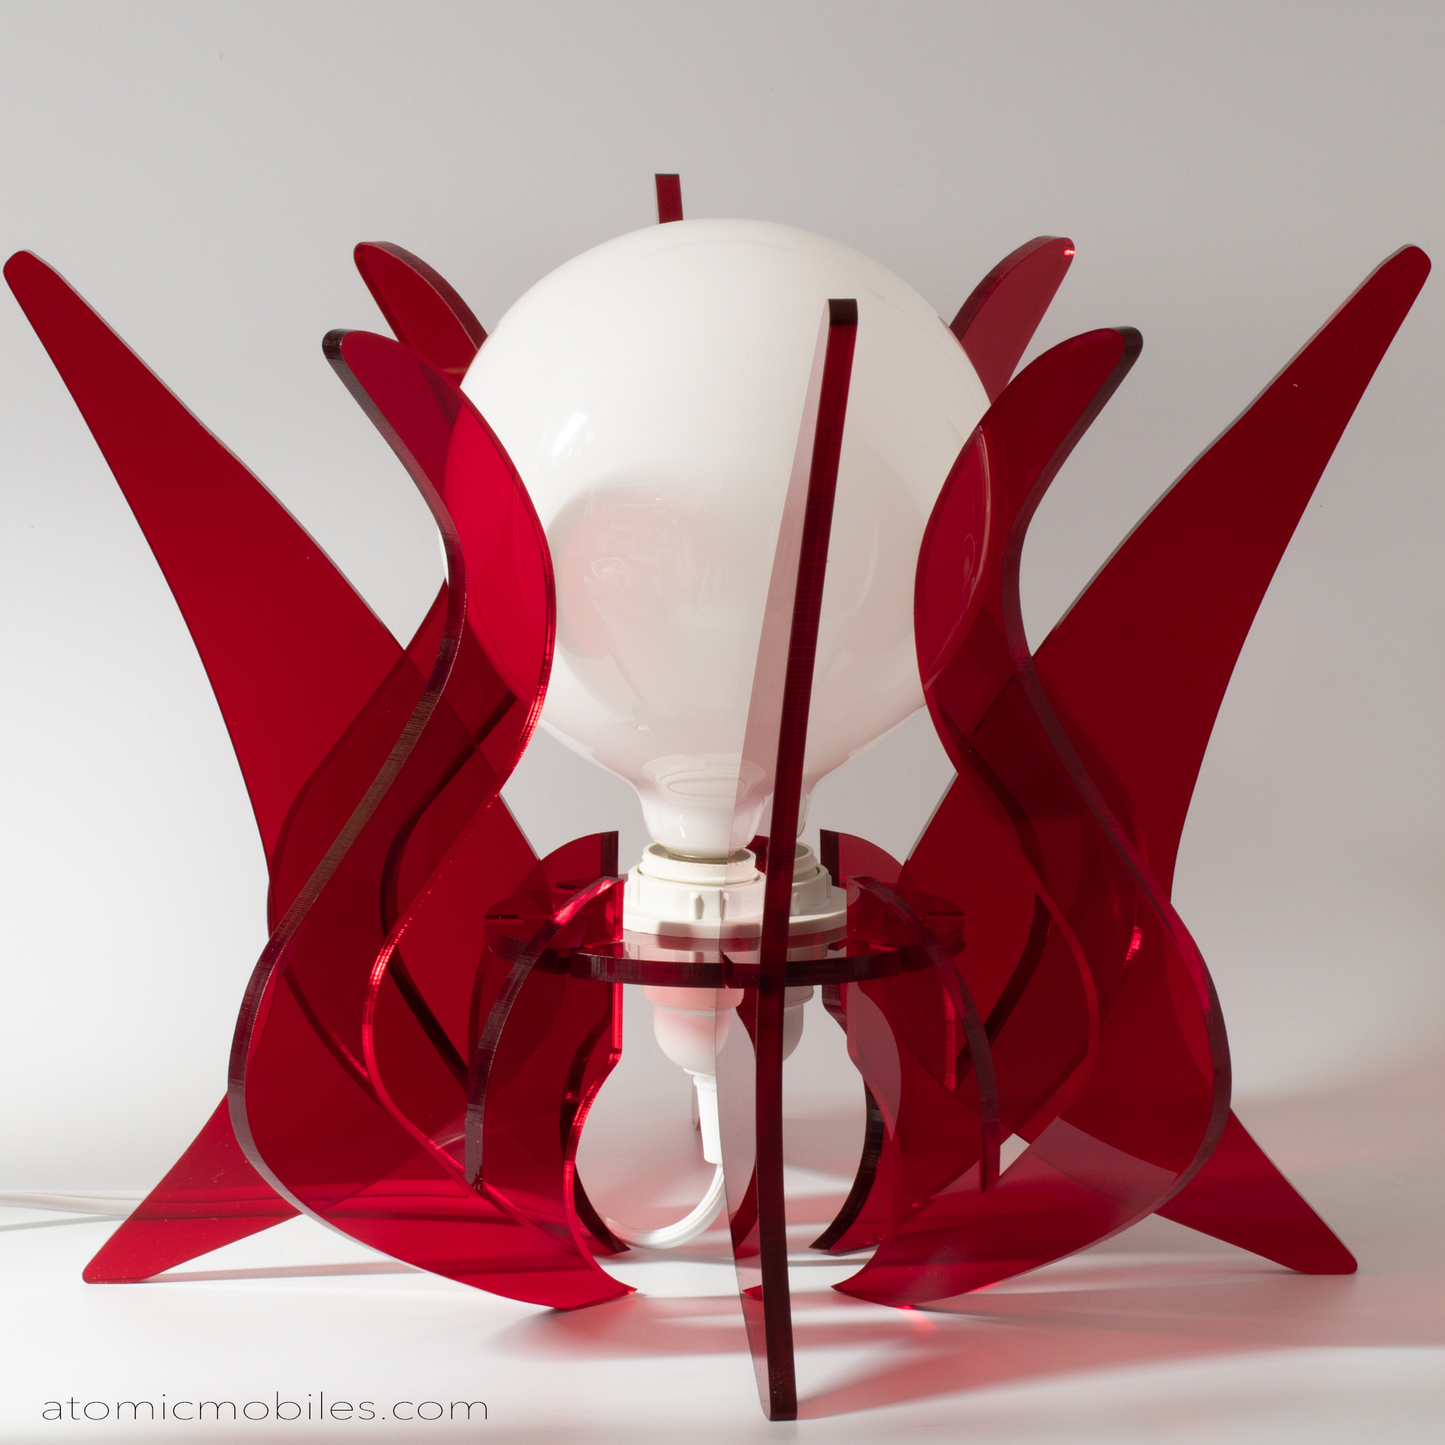 Spectacular retro mid century modern style acrylic plexiglass table top lamp in clear red by AtomicMobiles.com